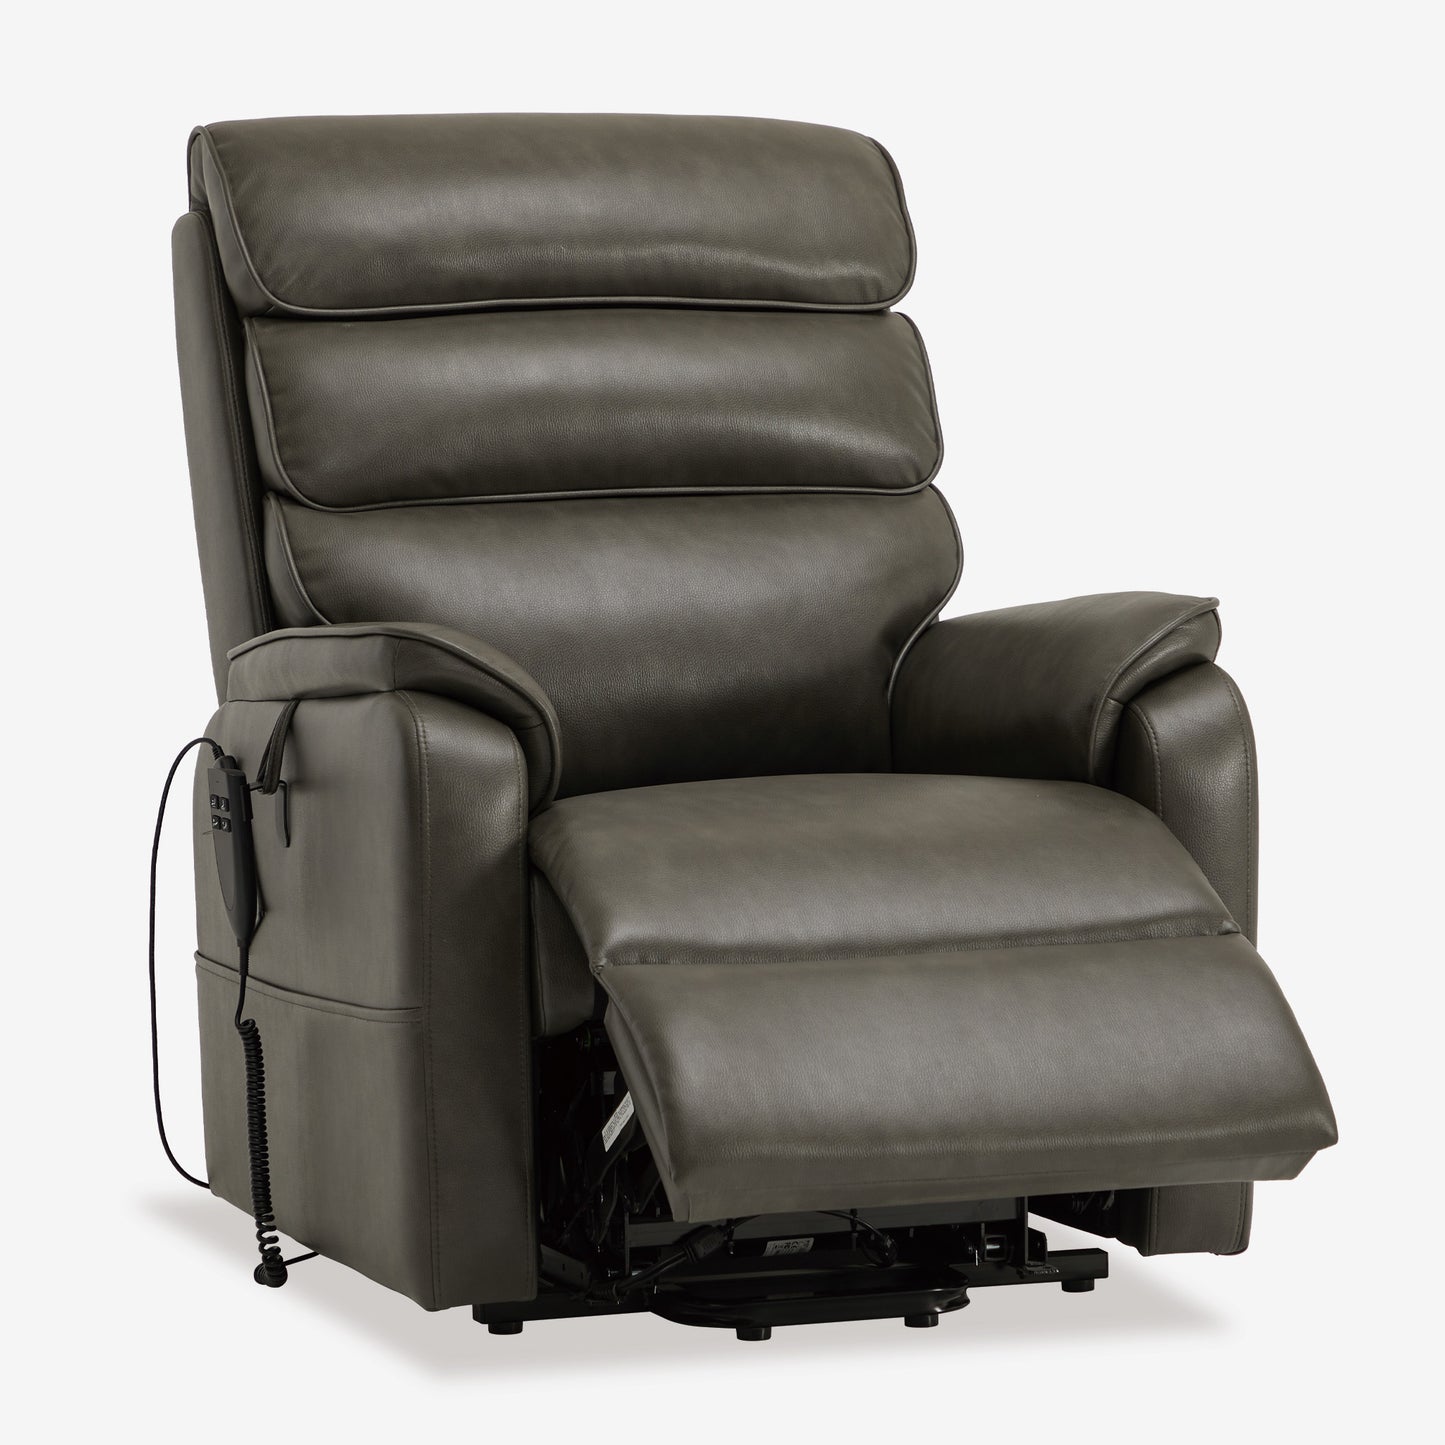 Best Power Lift Chairs For Elderly With Heat Massage And Infinite Positon